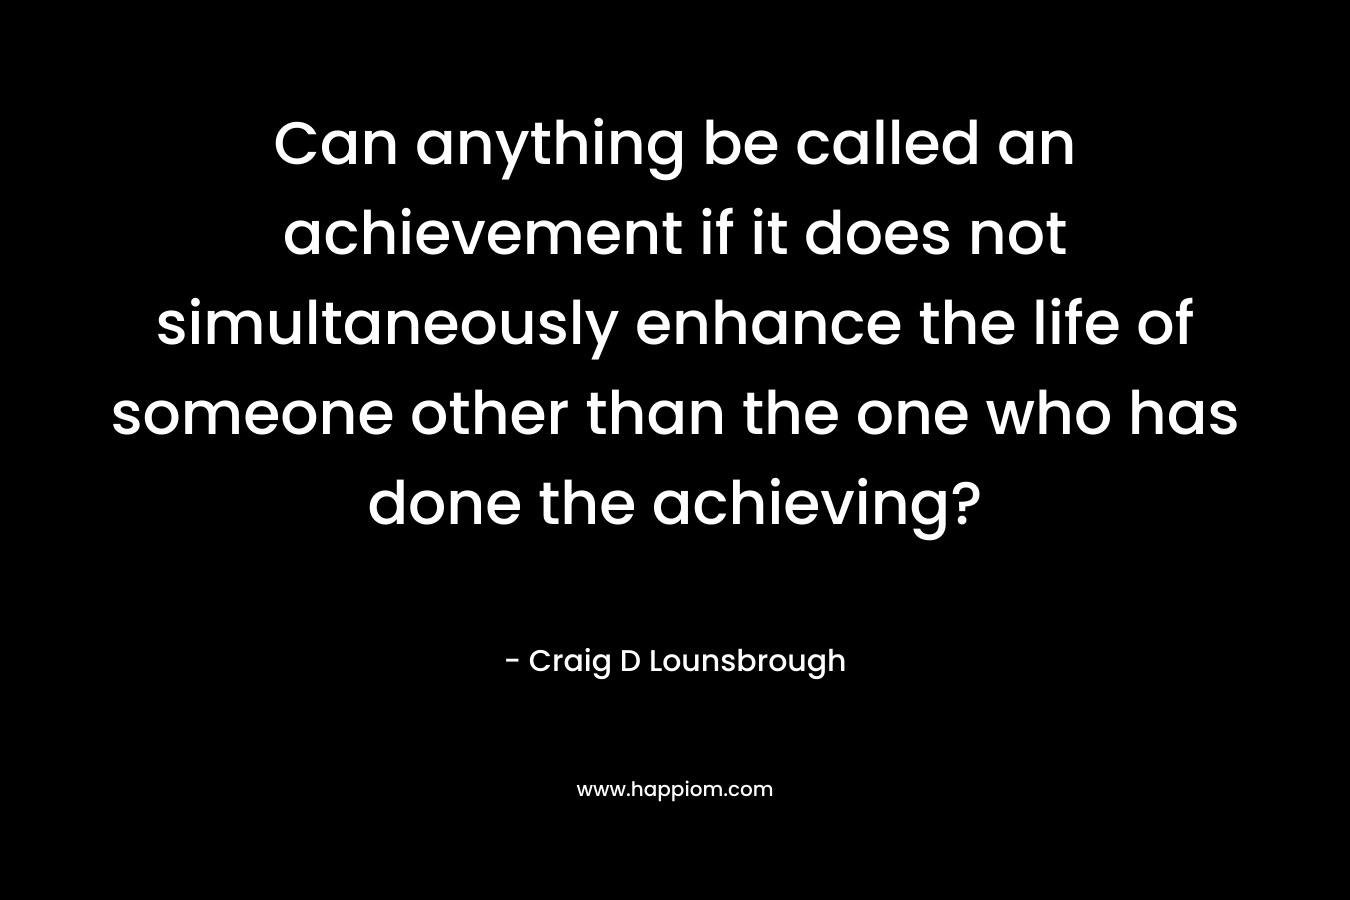 Can anything be called an achievement if it does not simultaneously enhance the life of someone other than the one who has done the achieving? – Craig D Lounsbrough